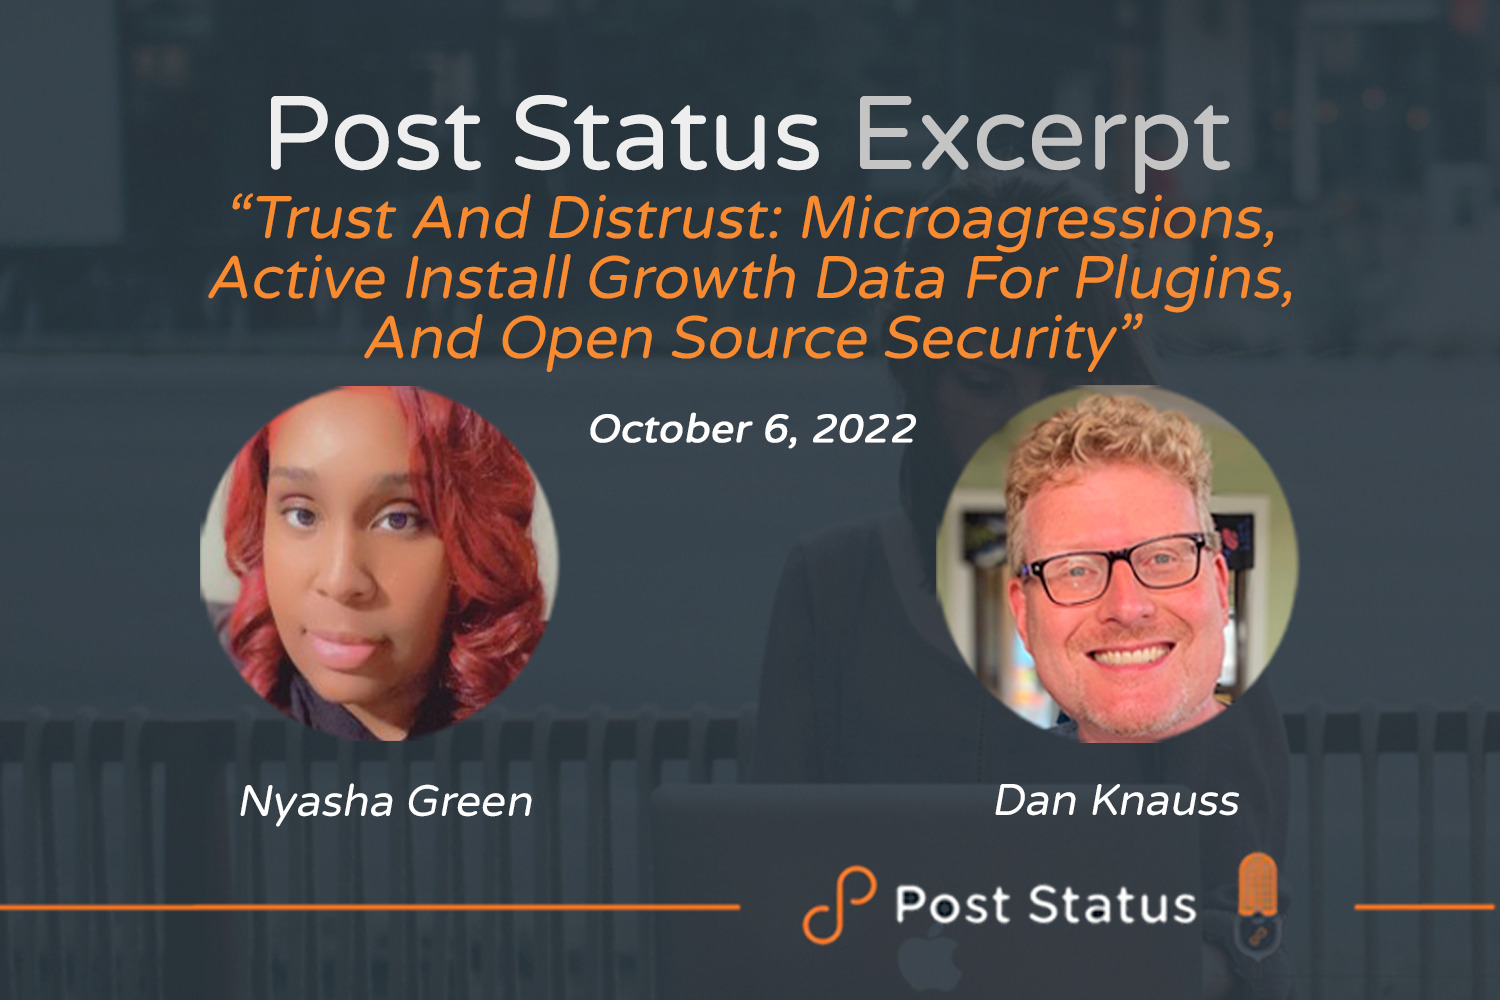 Post Status Excerpt (No. 70) — Trust and Distrust: Microaggressions, Active Install Growth Data for Plugins, and Open Source Security